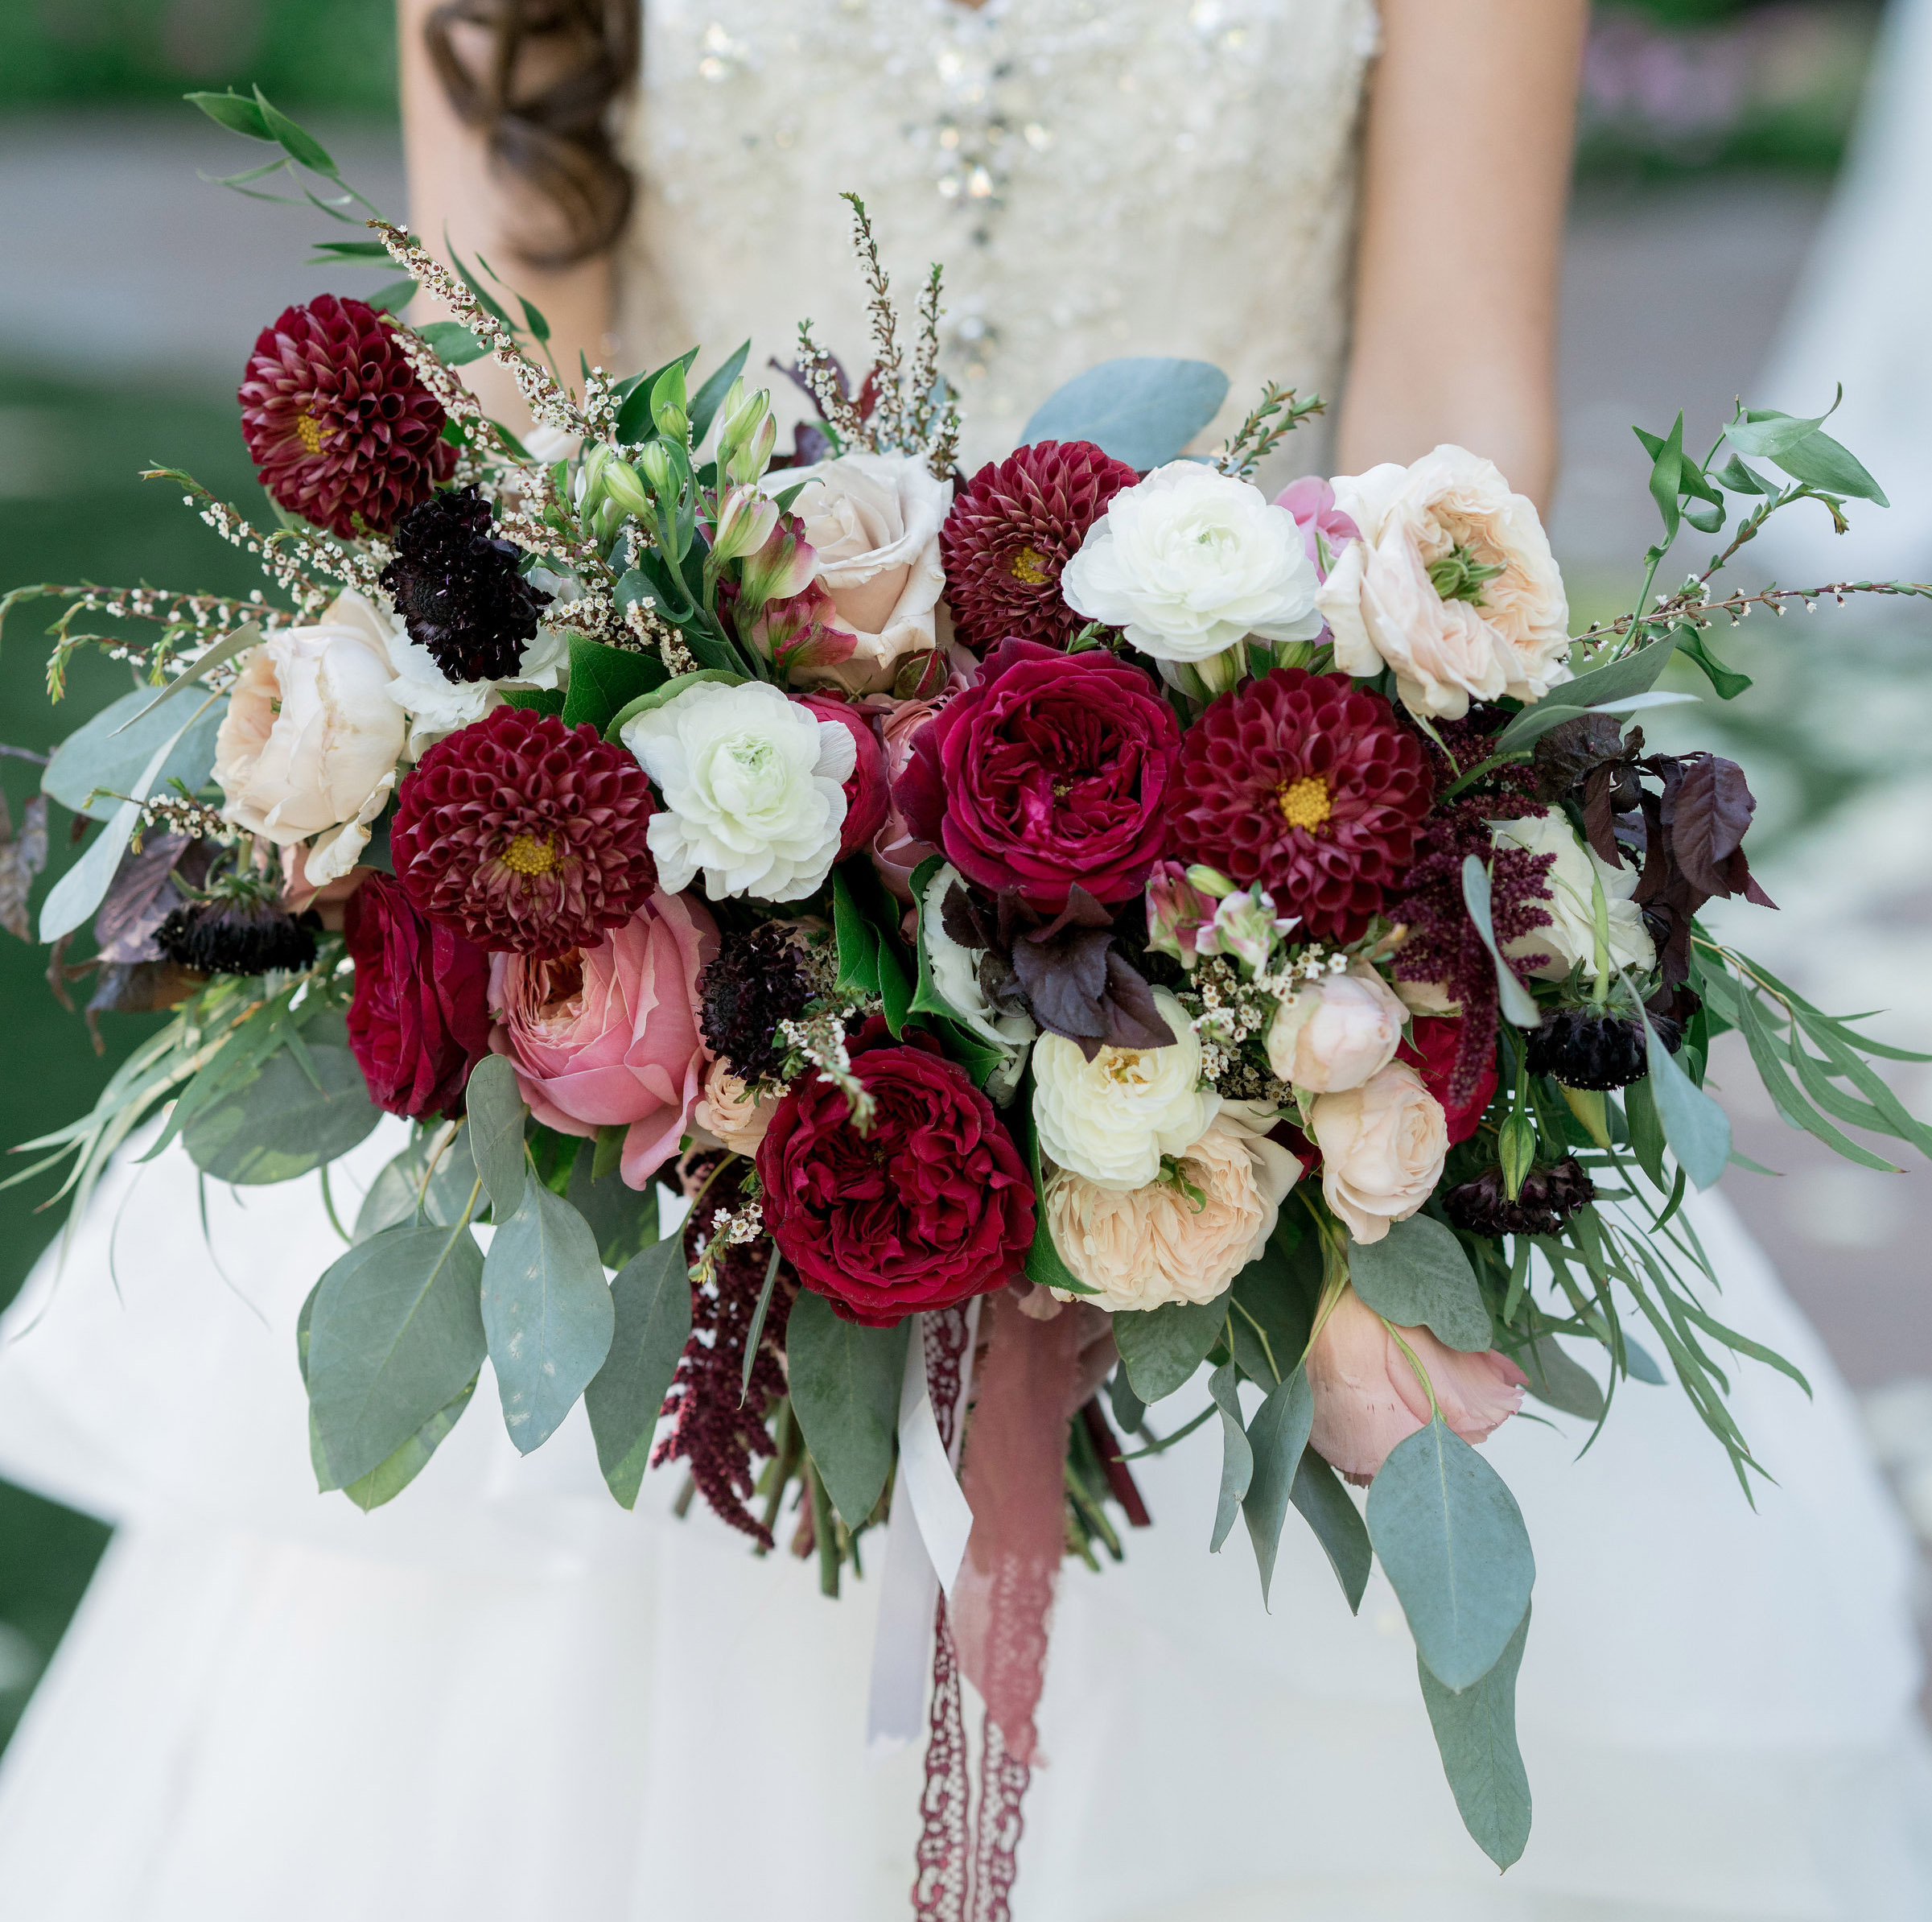 15 Bridal Bouquets in Valentine-Inspired Shades - Inside Weddings